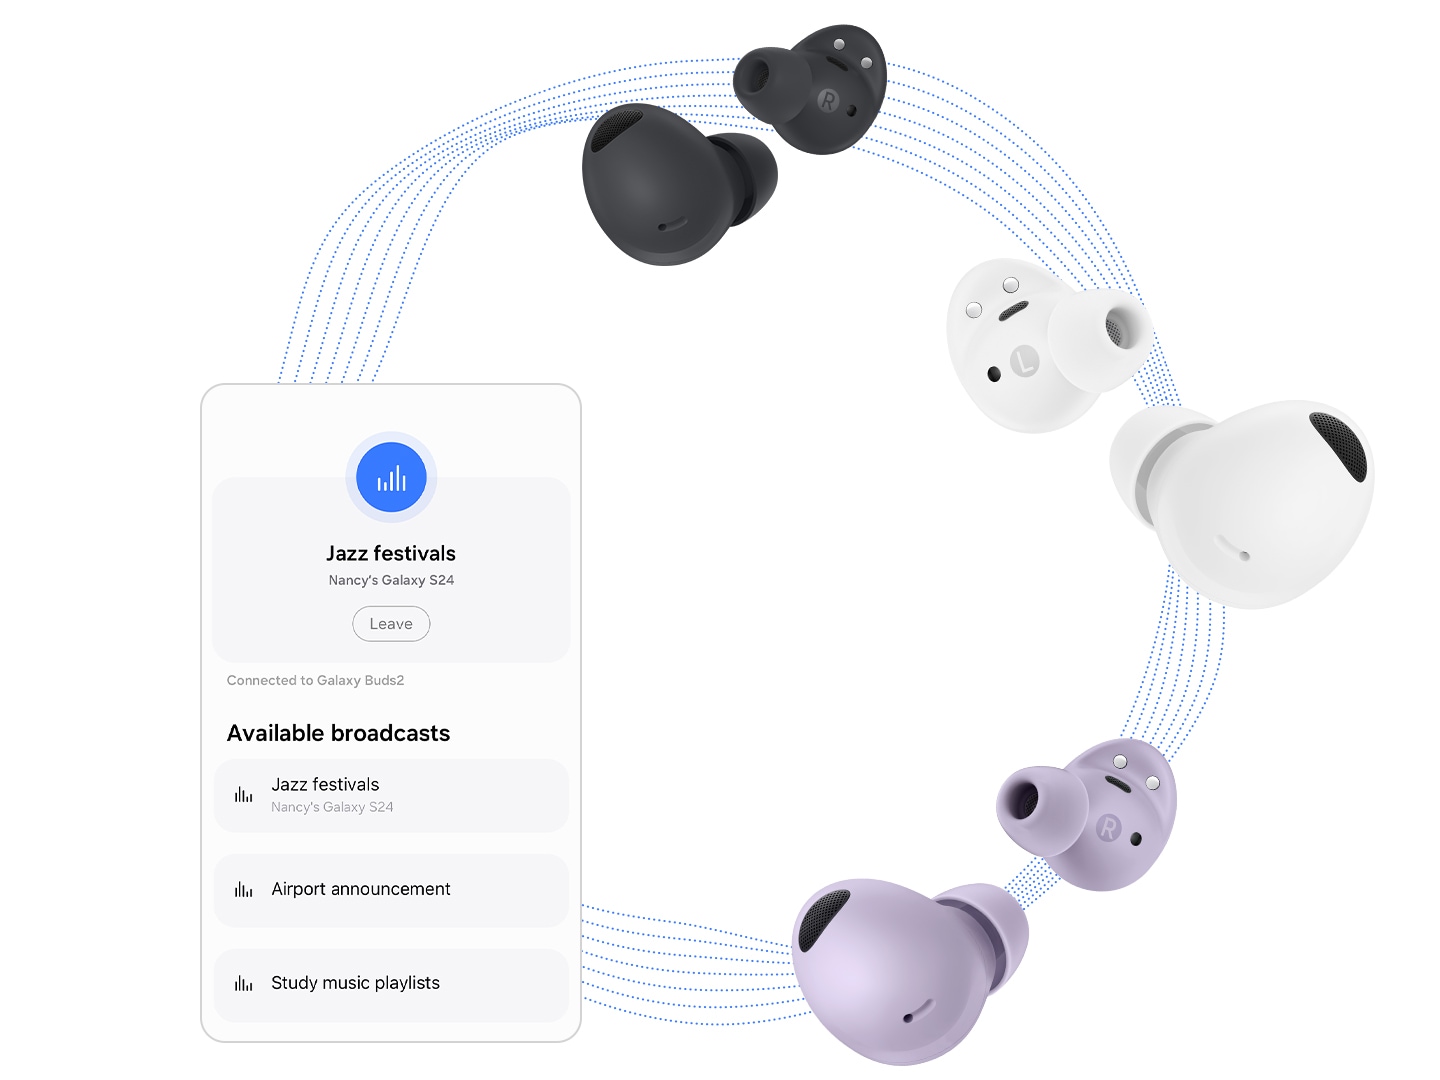 Three pairs of Samsung Galaxy Buds2 Pro are arranged in a semi-circle. At the top is a pair of Samsung Galaxy Buds2 Pro in Graphite. Slightly below it is a pair in White, and at the bottom is a pair in Bora Purple. On the left side is the Auracast feature showing available broadcasts in the area.